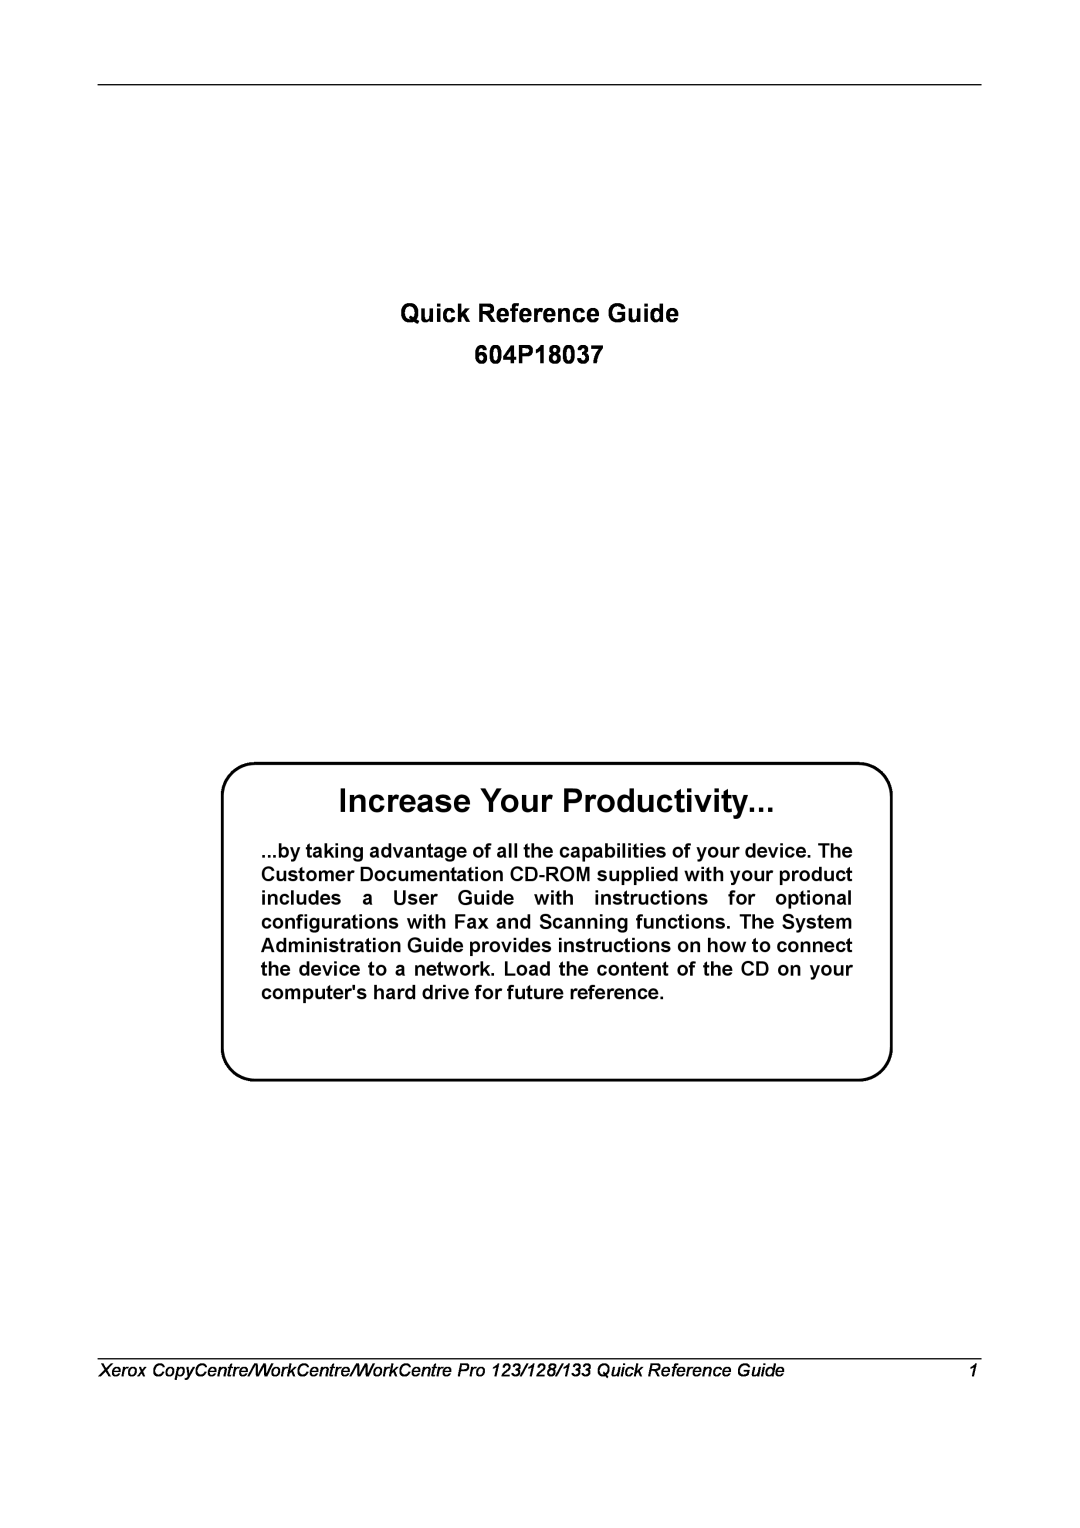 Xerox manual Quick Reference Guide 604P18037, Increase Your Productivity 